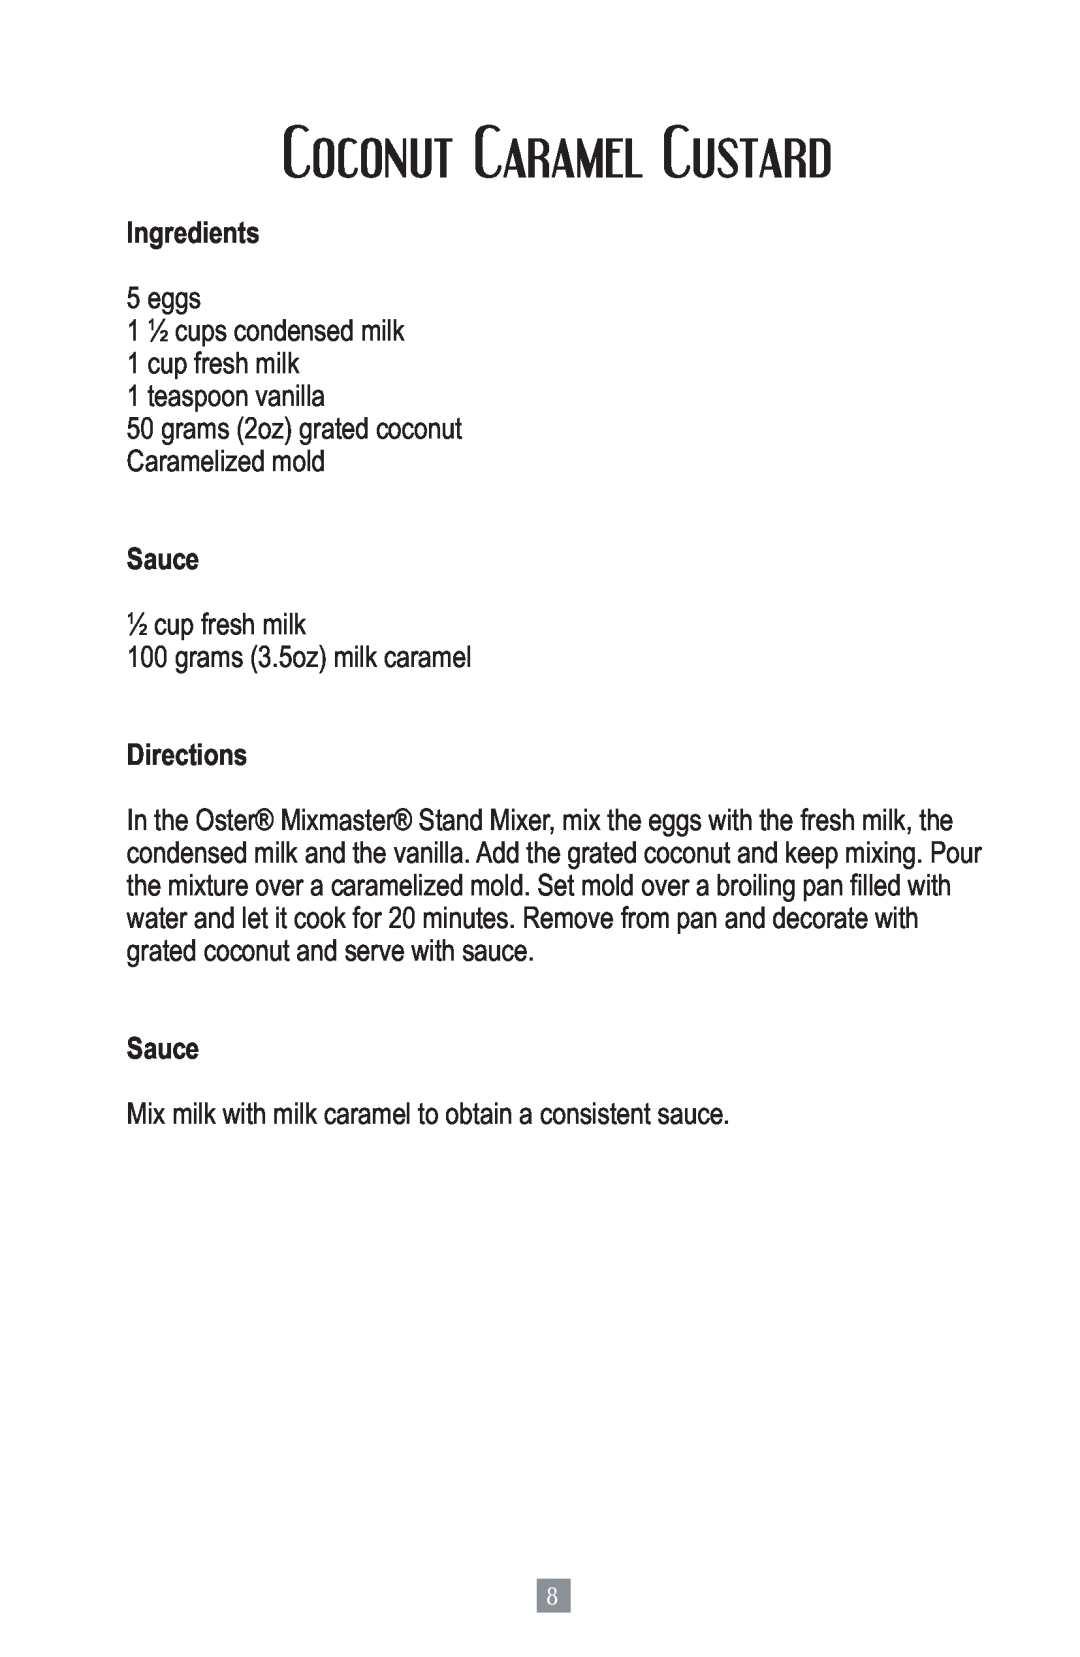 Oster 2700 instruction manual Coconut Caramel Custard, Ingredients, Sauce, Directions 